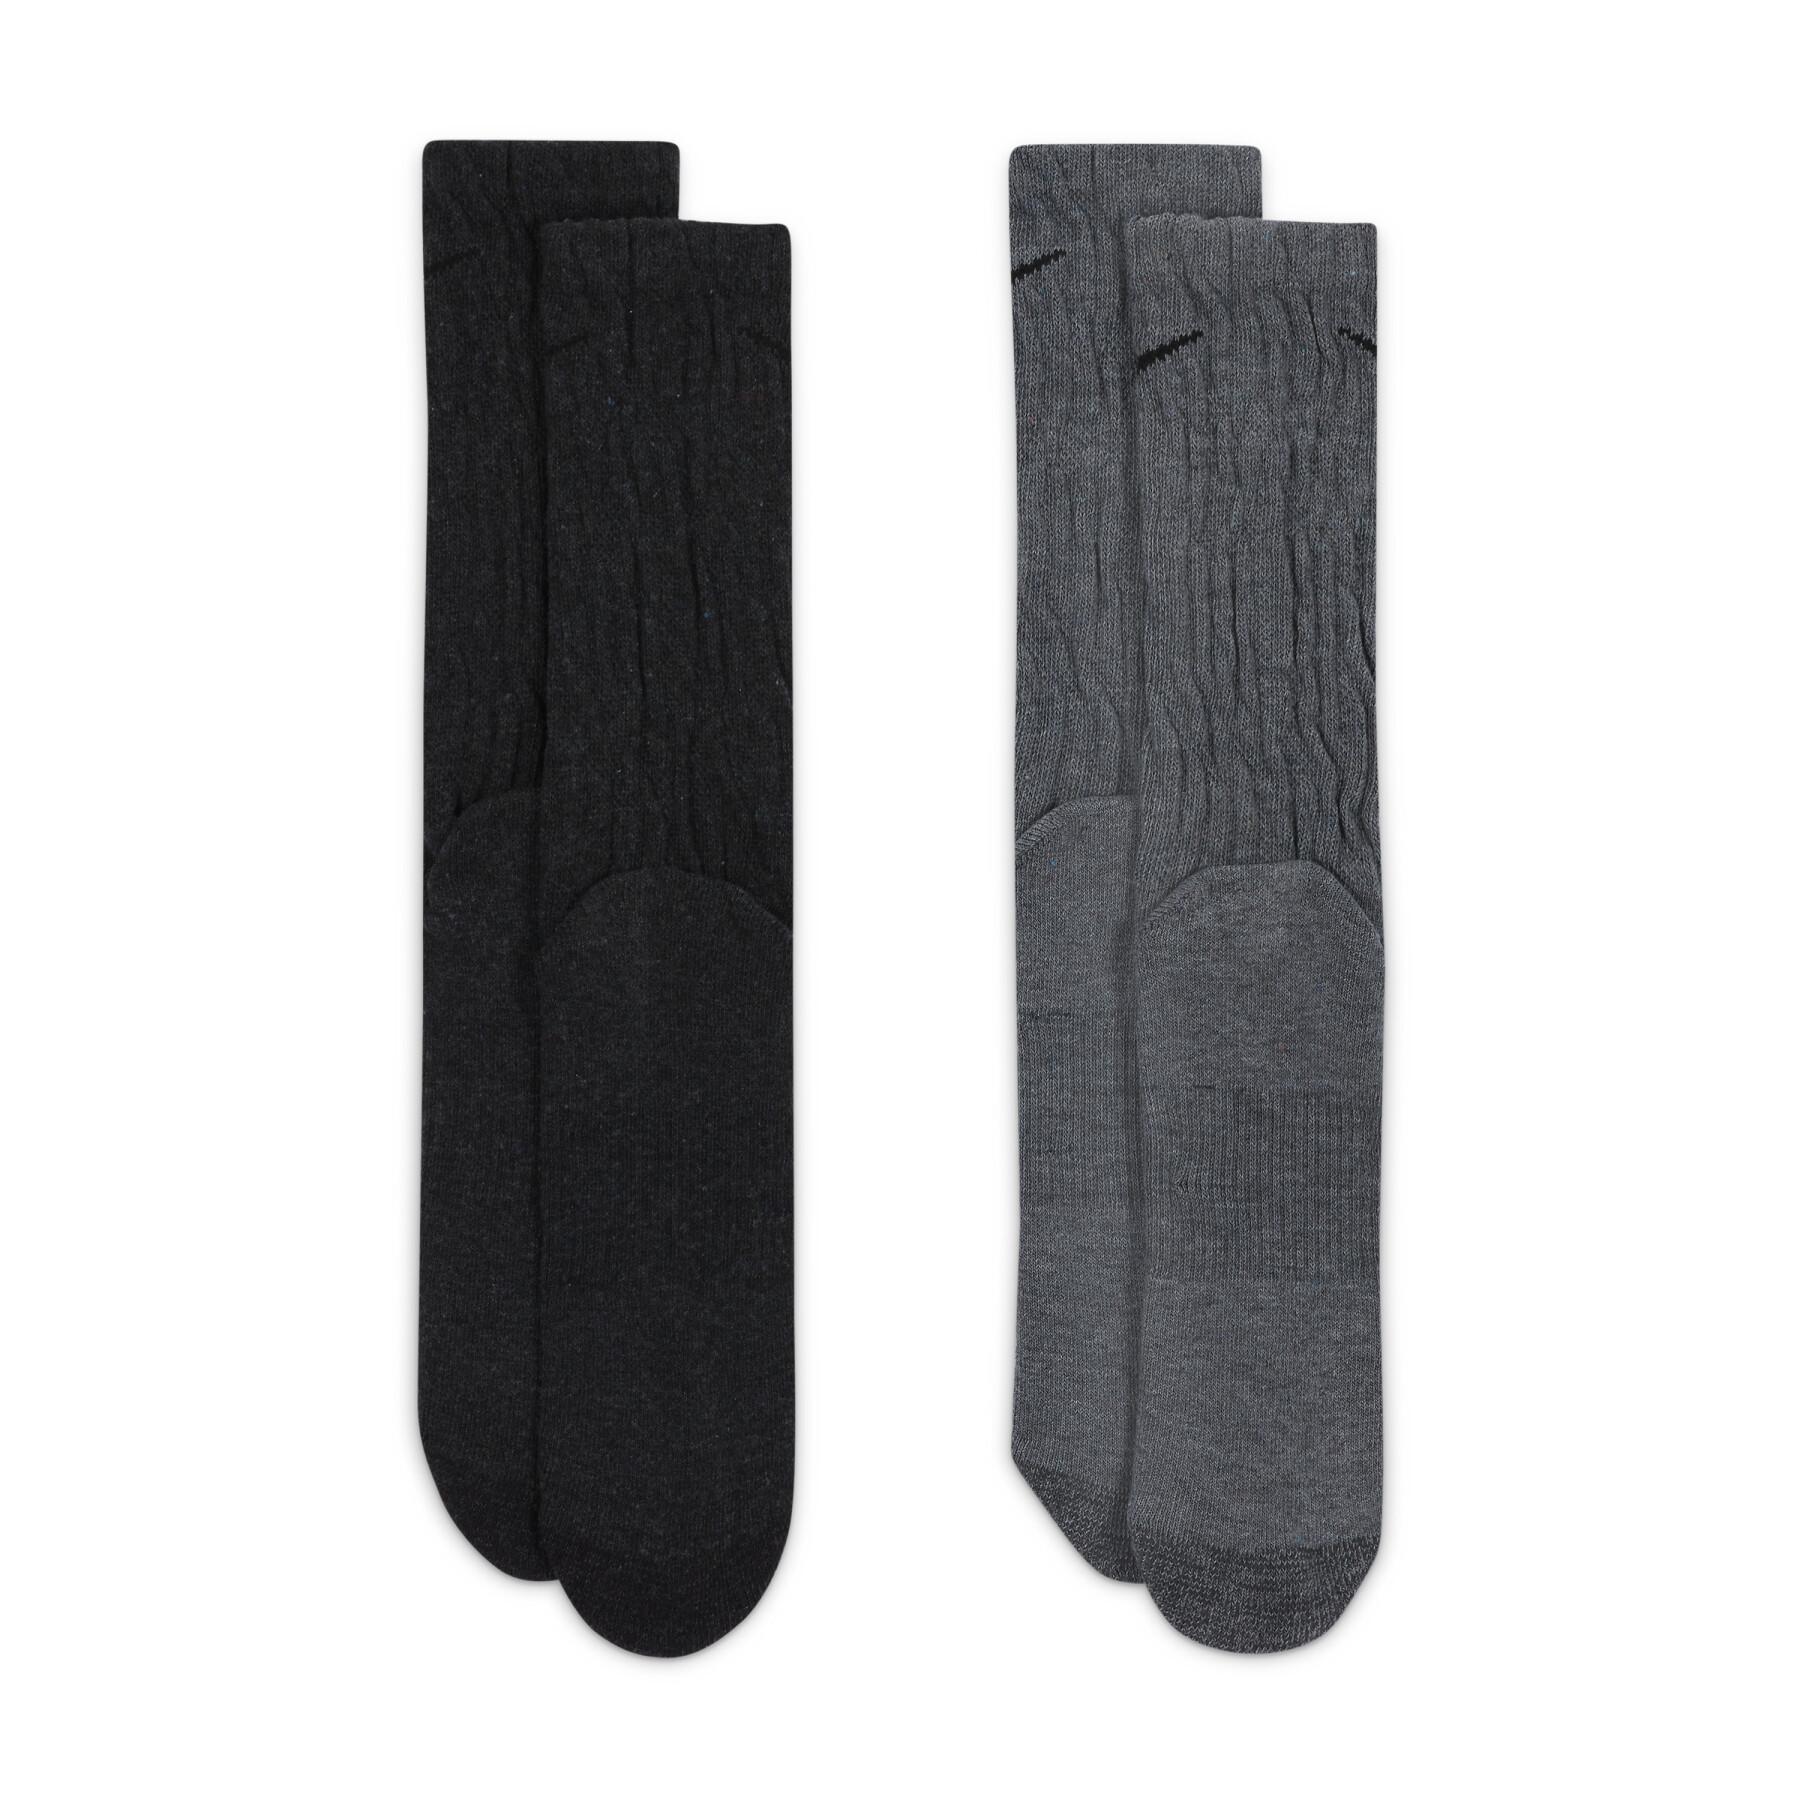 Chaussettes Nike Everyday plus